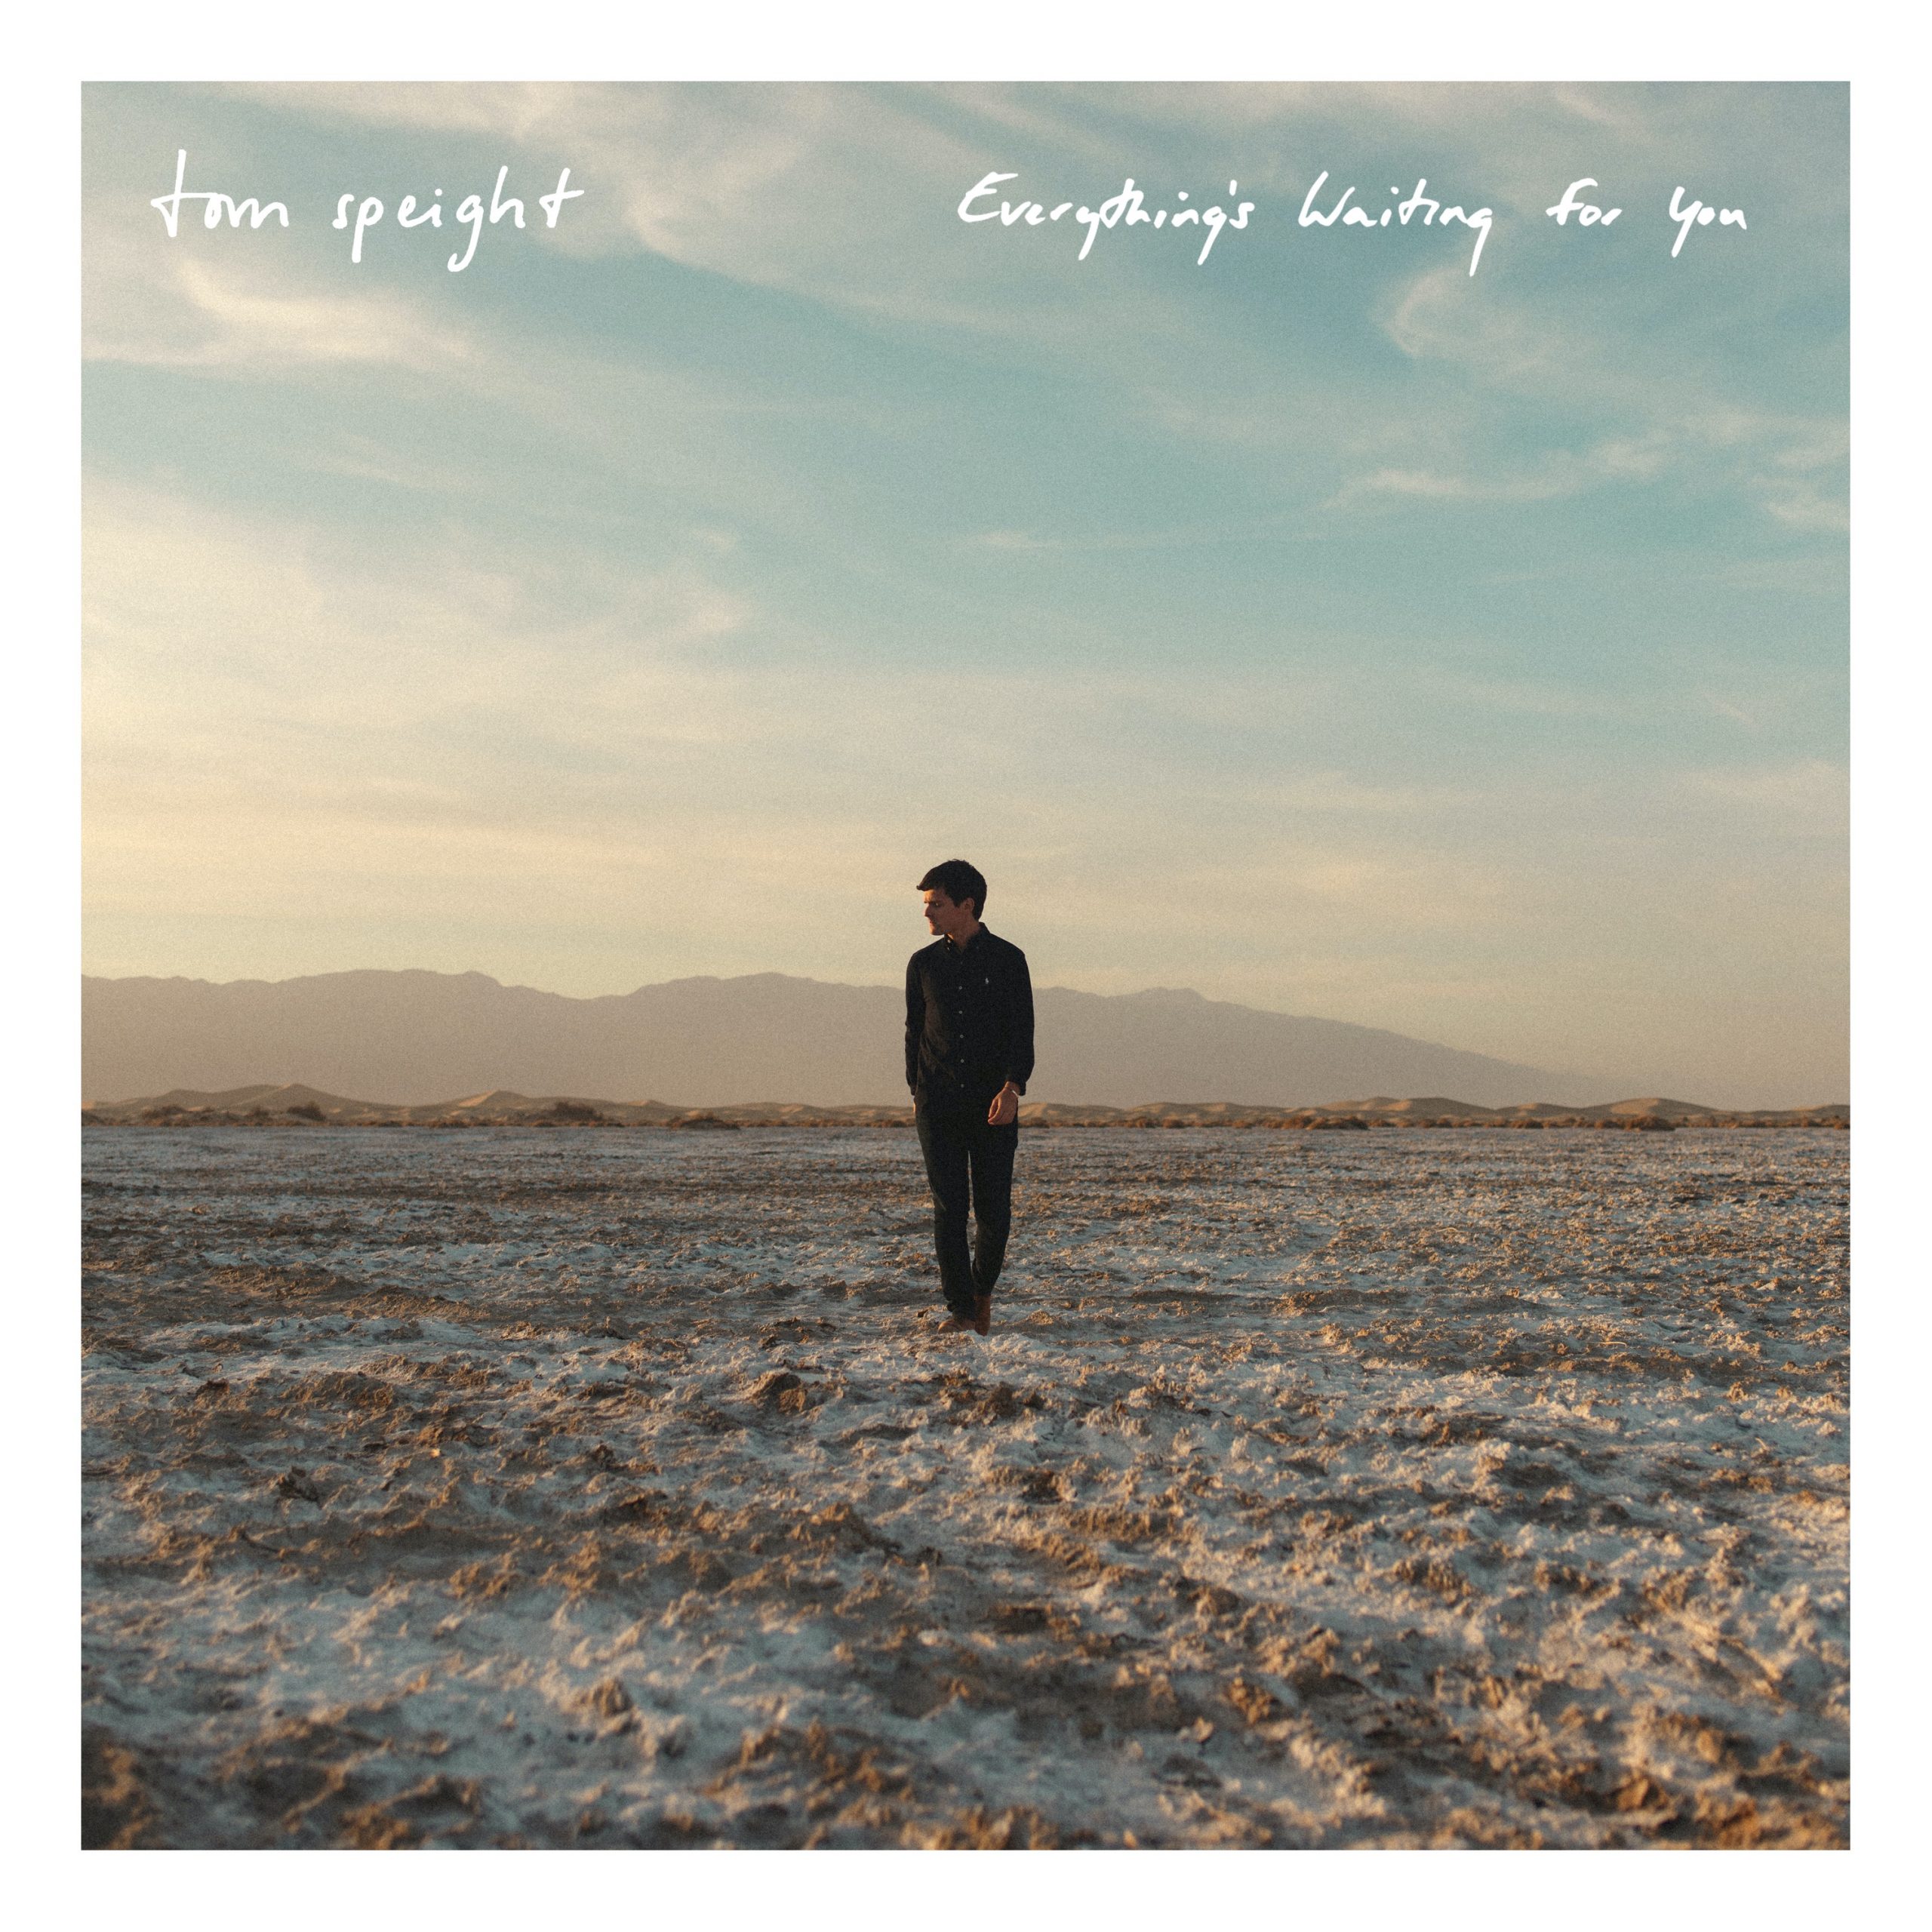 everything's waiting for you - Tom Speight - UK - indie music - indie folk - new music - music blog - indie blog - wolf in a suit - wolfinasuit - wolf in a suit blog - wolf in a suit music blog